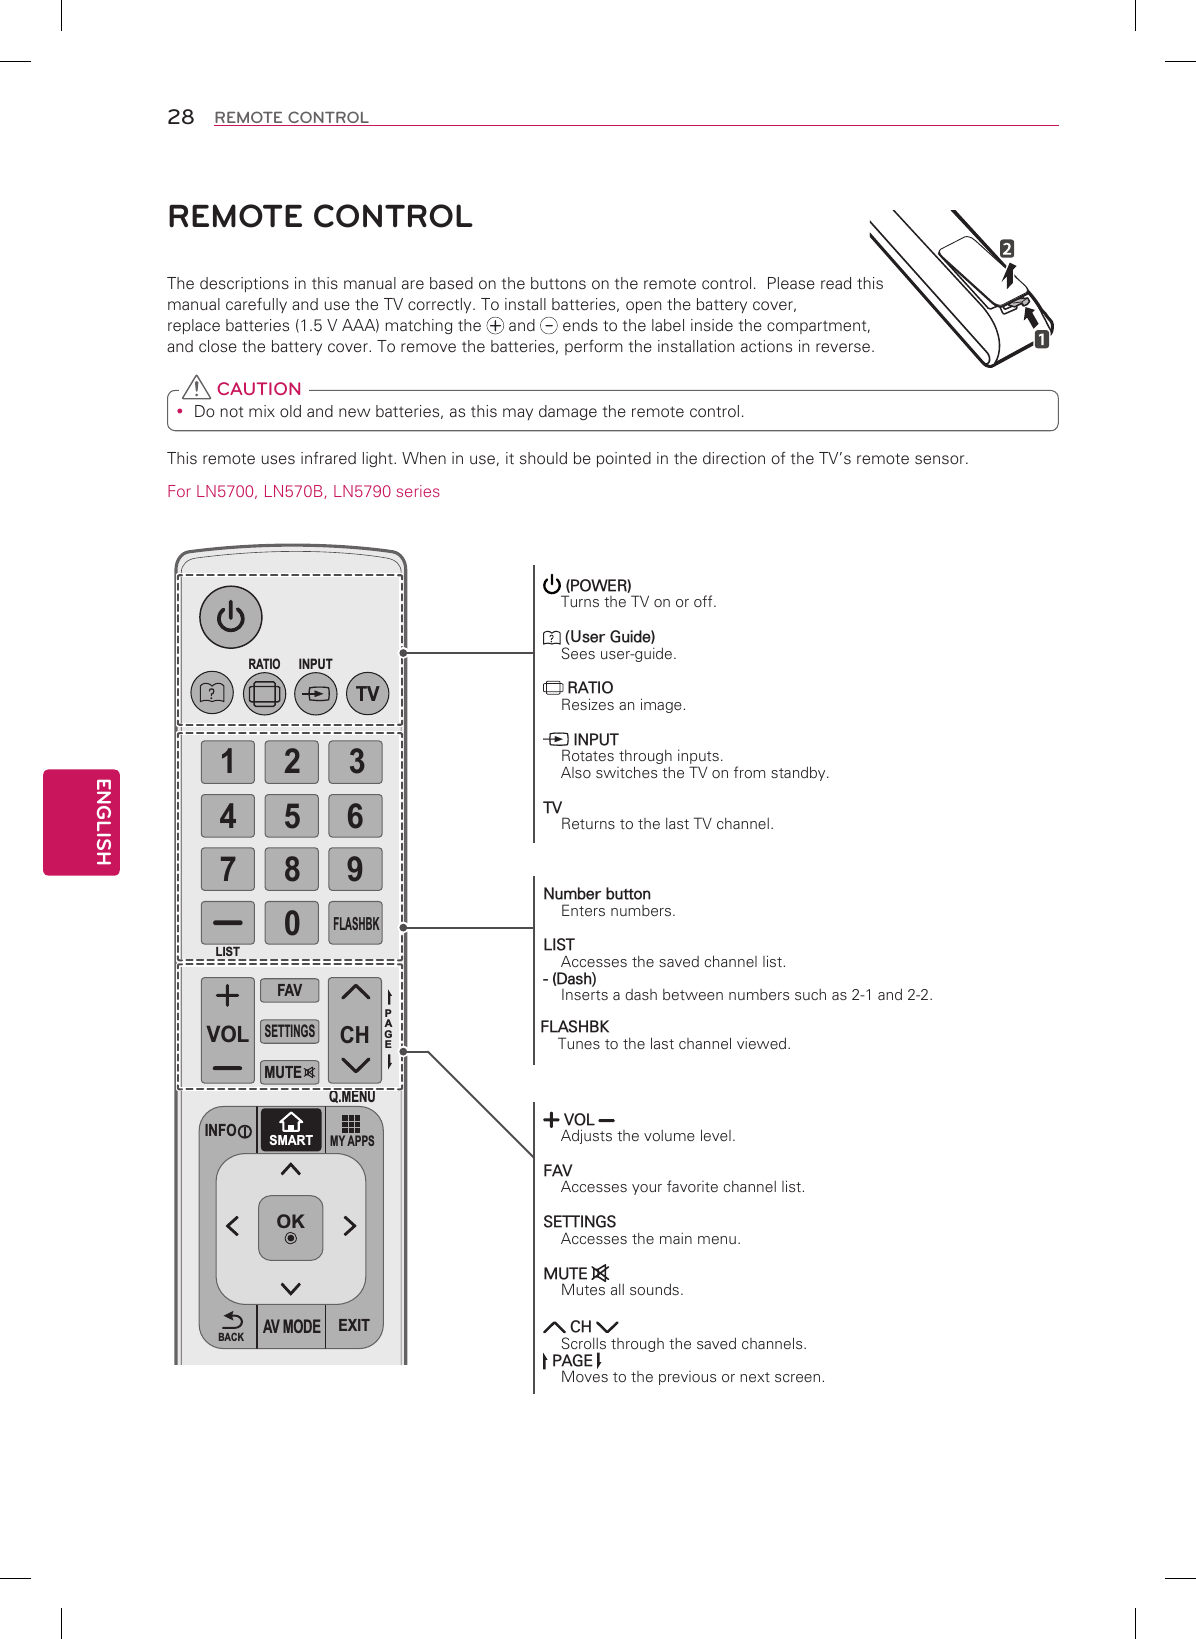 ENGLISH28 REMOTE CONTROLREMOTE CONTROLThe descriptions in this manual are based on the buttons on the remote control.  Please read this manual carefully and use the TV correctly. To install batteries, open the battery cover,  replace batteries (1.5 V AAA) matching the   and   ends to the label inside the compartment, and close the battery cover. To remove the batteries, perform the installation actions in reverse. Do not mix old and new batteries, as this may damage the remote control. CAUTIONThis remote uses infrared light. When in use, it should be pointed in the direction of the TV’s remote sensor.For LN5700, LN570B, LN5790 series1 2 34 5 67 809MY APPSTVSMARTCHVOLPAGERATIOINPUTFAVMUTELISTFLASHBKEXITBACKOKQ.MENUINFOAV MODESETTINGS (POWER)Turns the TV on or off. (User Guide)Sees user-guide. RATIOResizes an image. INPUTRotates through inputs. Also switches the TV on from standby.TVReturns to the last TV channel.Number buttonEnters numbers.LISTAccesses the saved channel list.- (Dash)Inserts a dash between numbers such as 2-1 and 2-2.FLASHBKTunes to the last channel viewed. VOL Adjusts the volume level.FAVAccesses your favorite channel list.SETTINGSAccesses the main menu.MUTE Mutes all sounds. CH Scrolls through the saved channels. PAGE Moves to the previous or next screen.